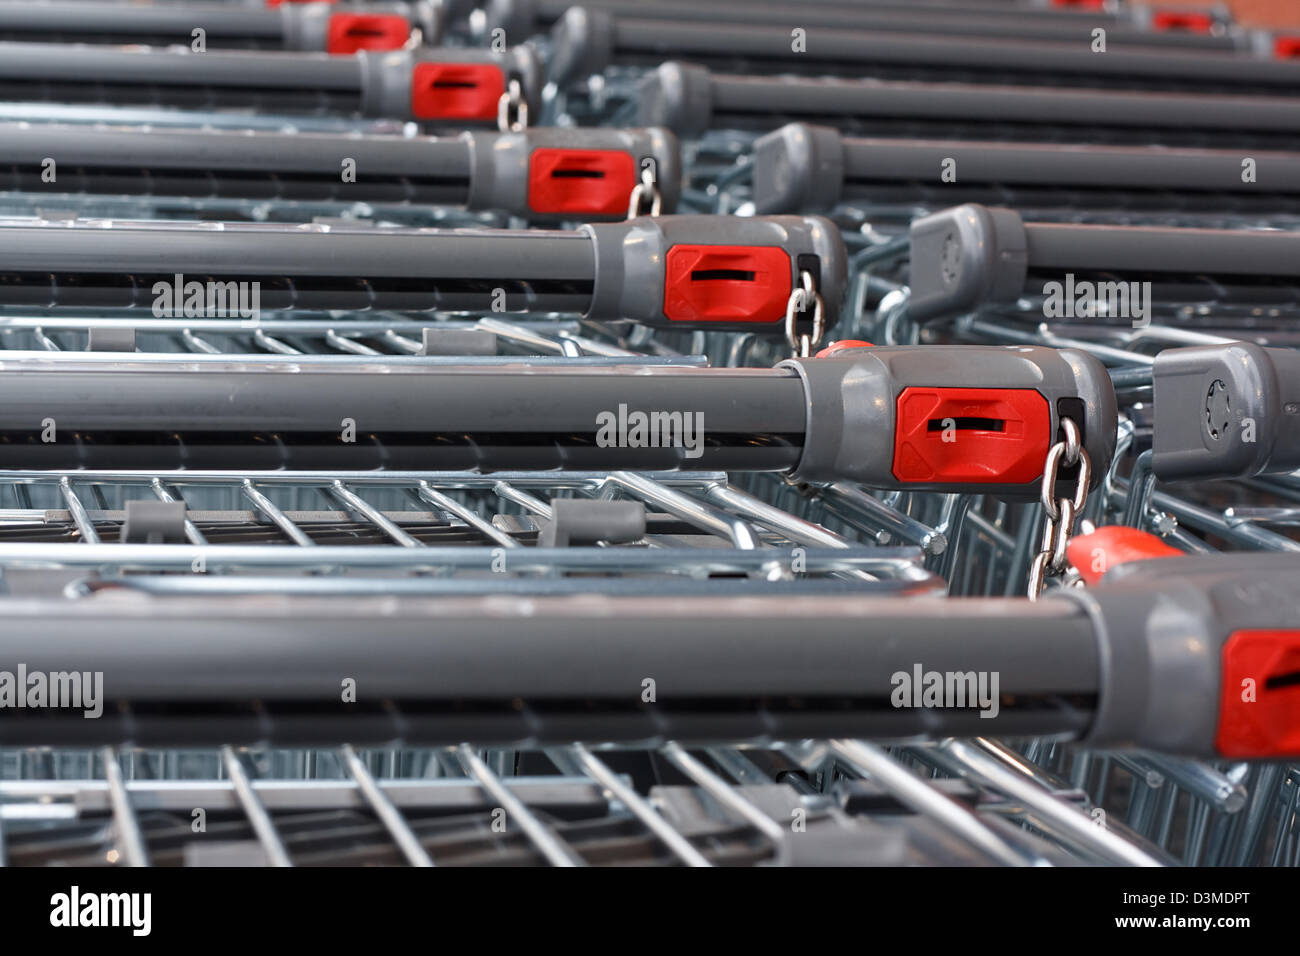 Rows of unbranded shopping carts at the hypermarket Stock Photo